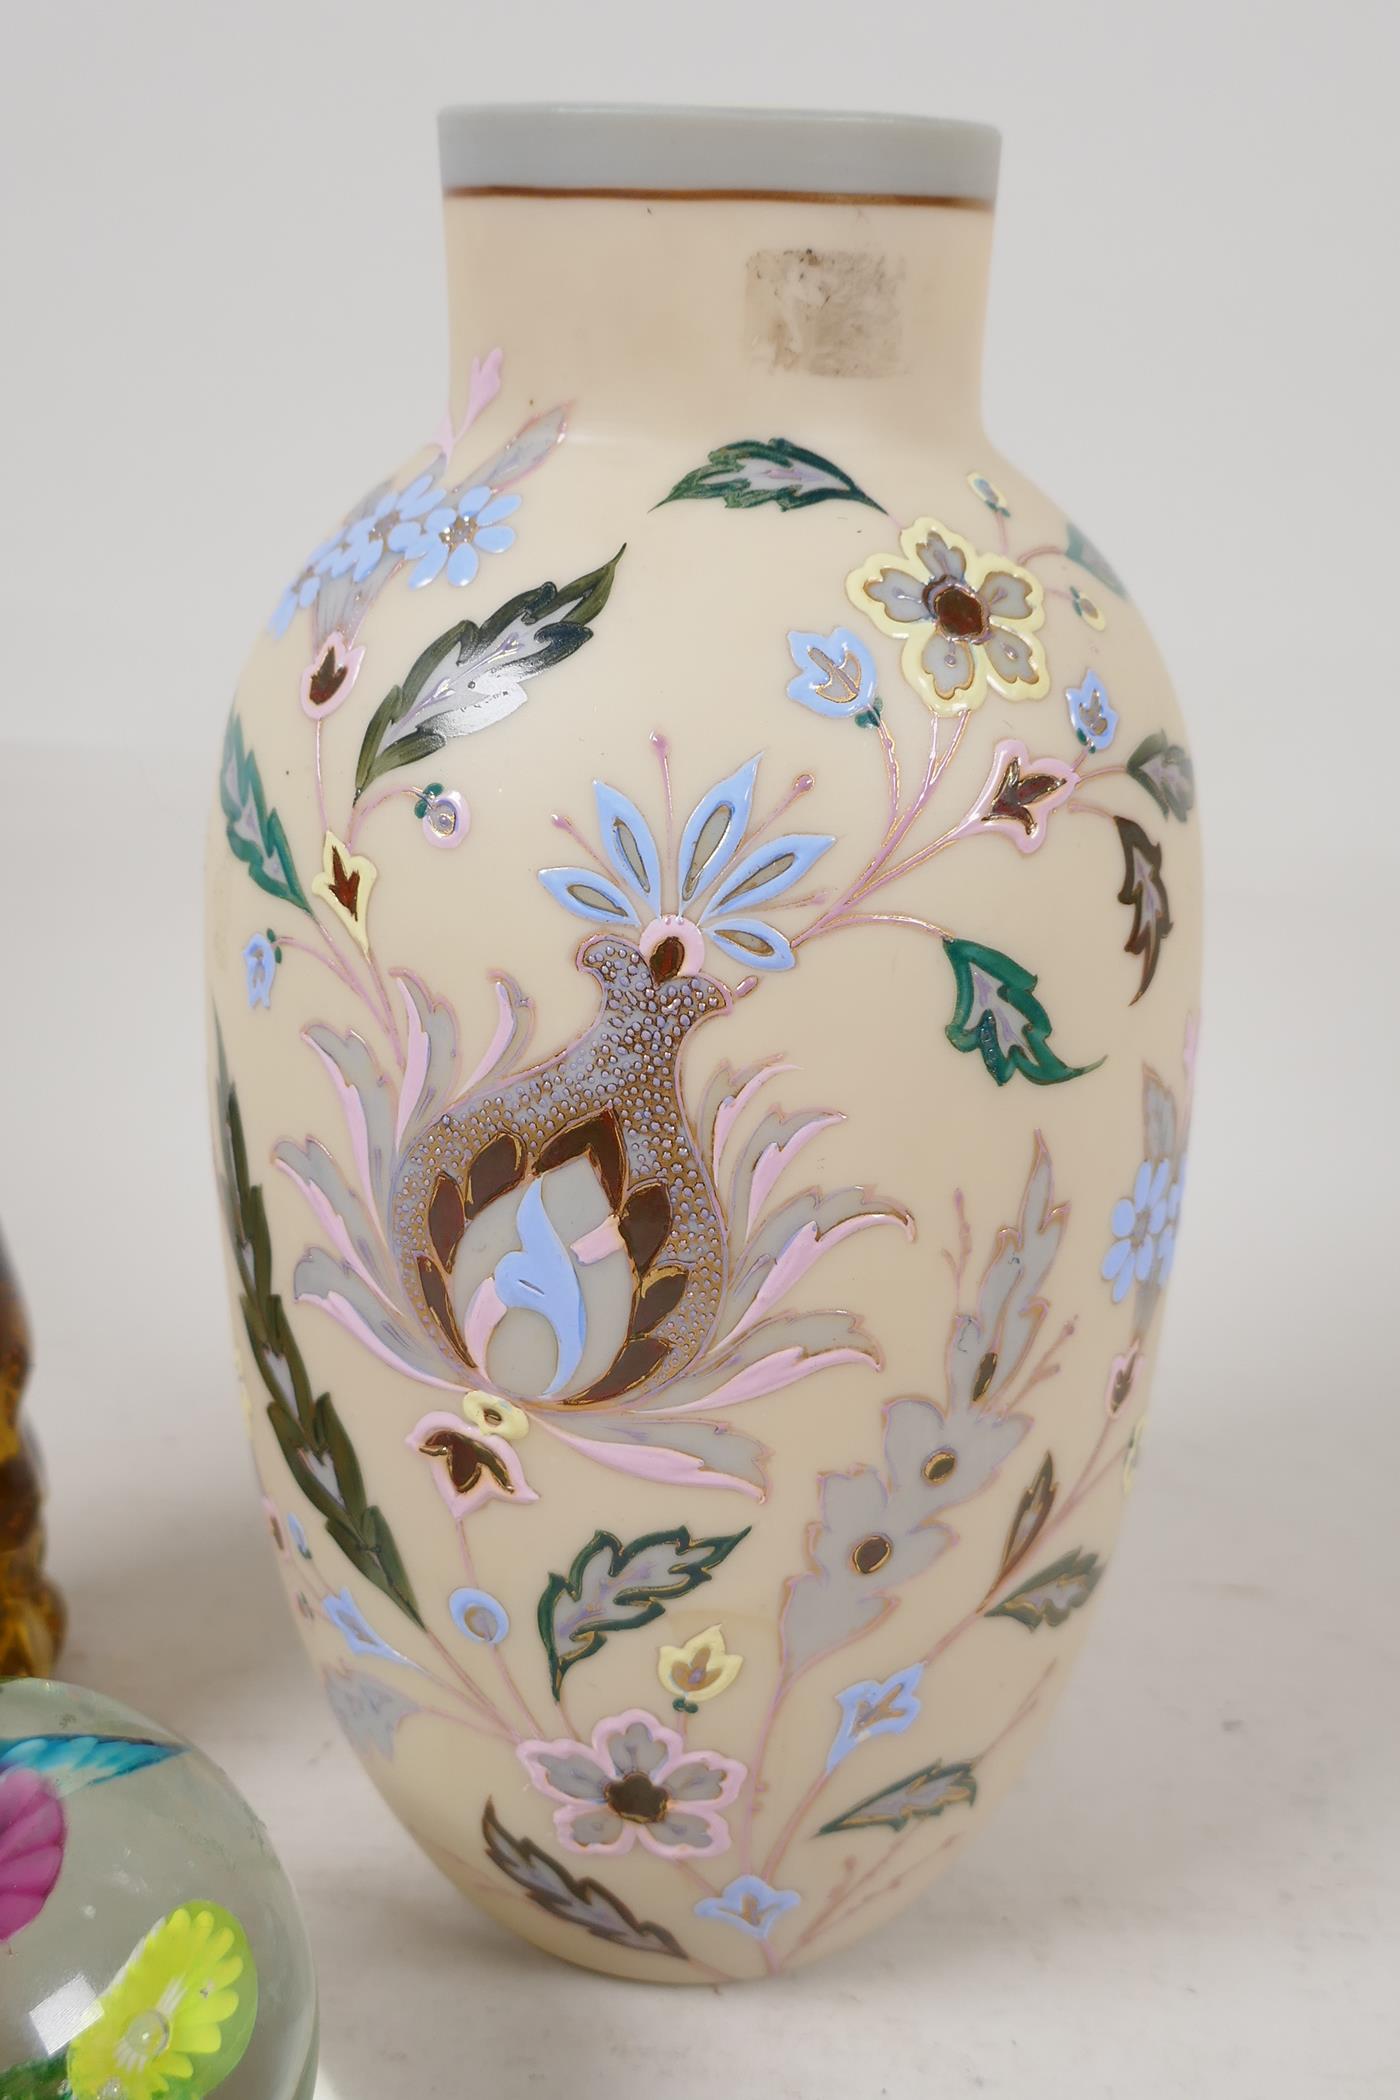 A C19th milk glass vase painted with flowers, 9" high, a Murano glass figure of an elephant and - Image 2 of 5